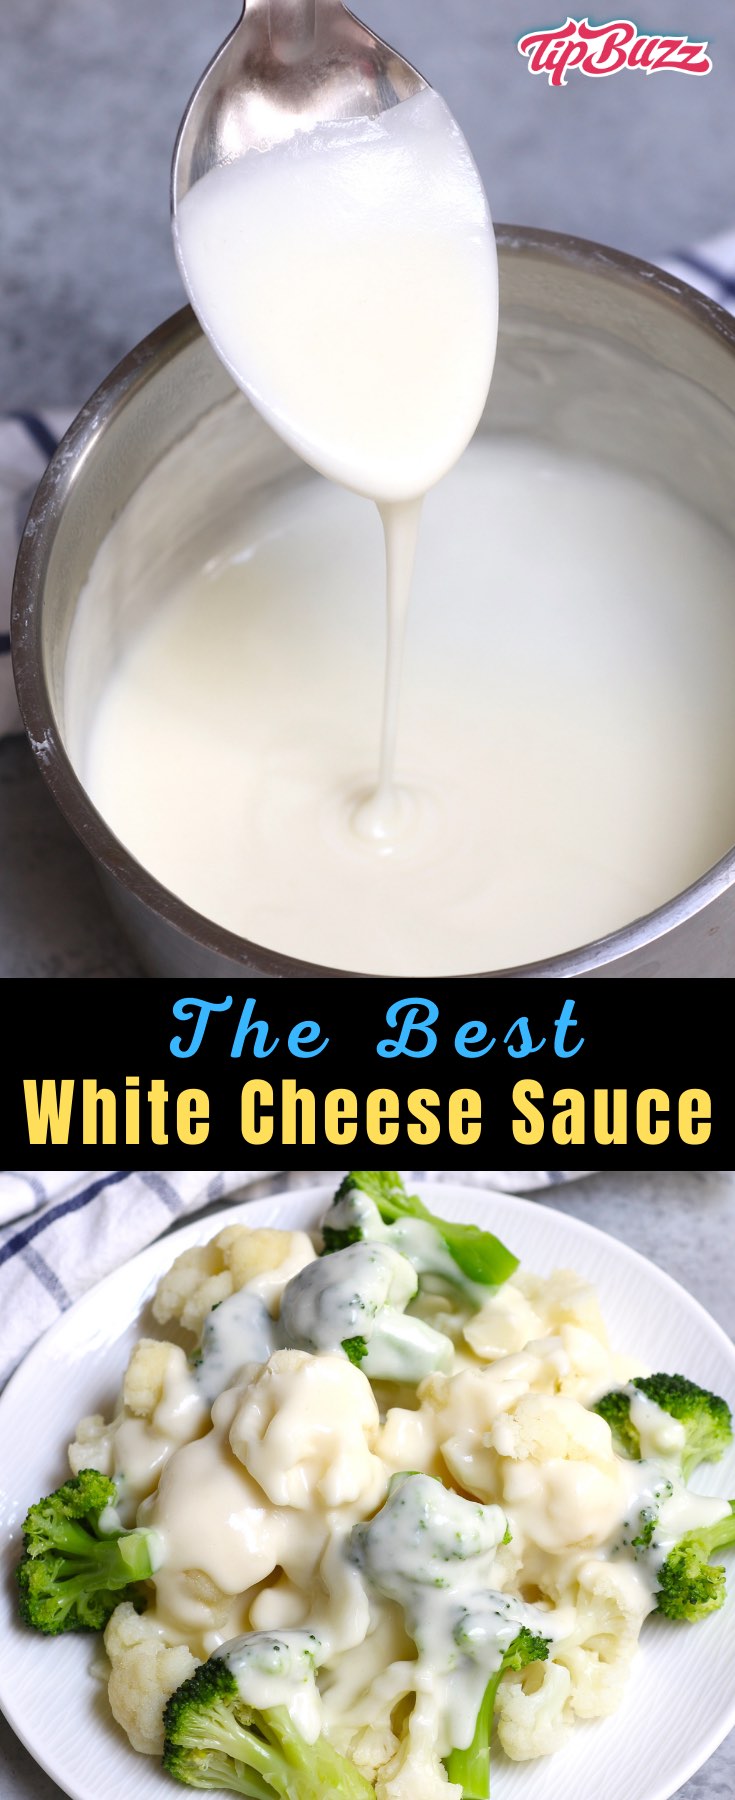 This White Cheese Sauce is creamy and smooth, perfect for drizzling onto vegetables or serving as a hot dip. It's easy to make with just 4 ingredients! #cheesesauce